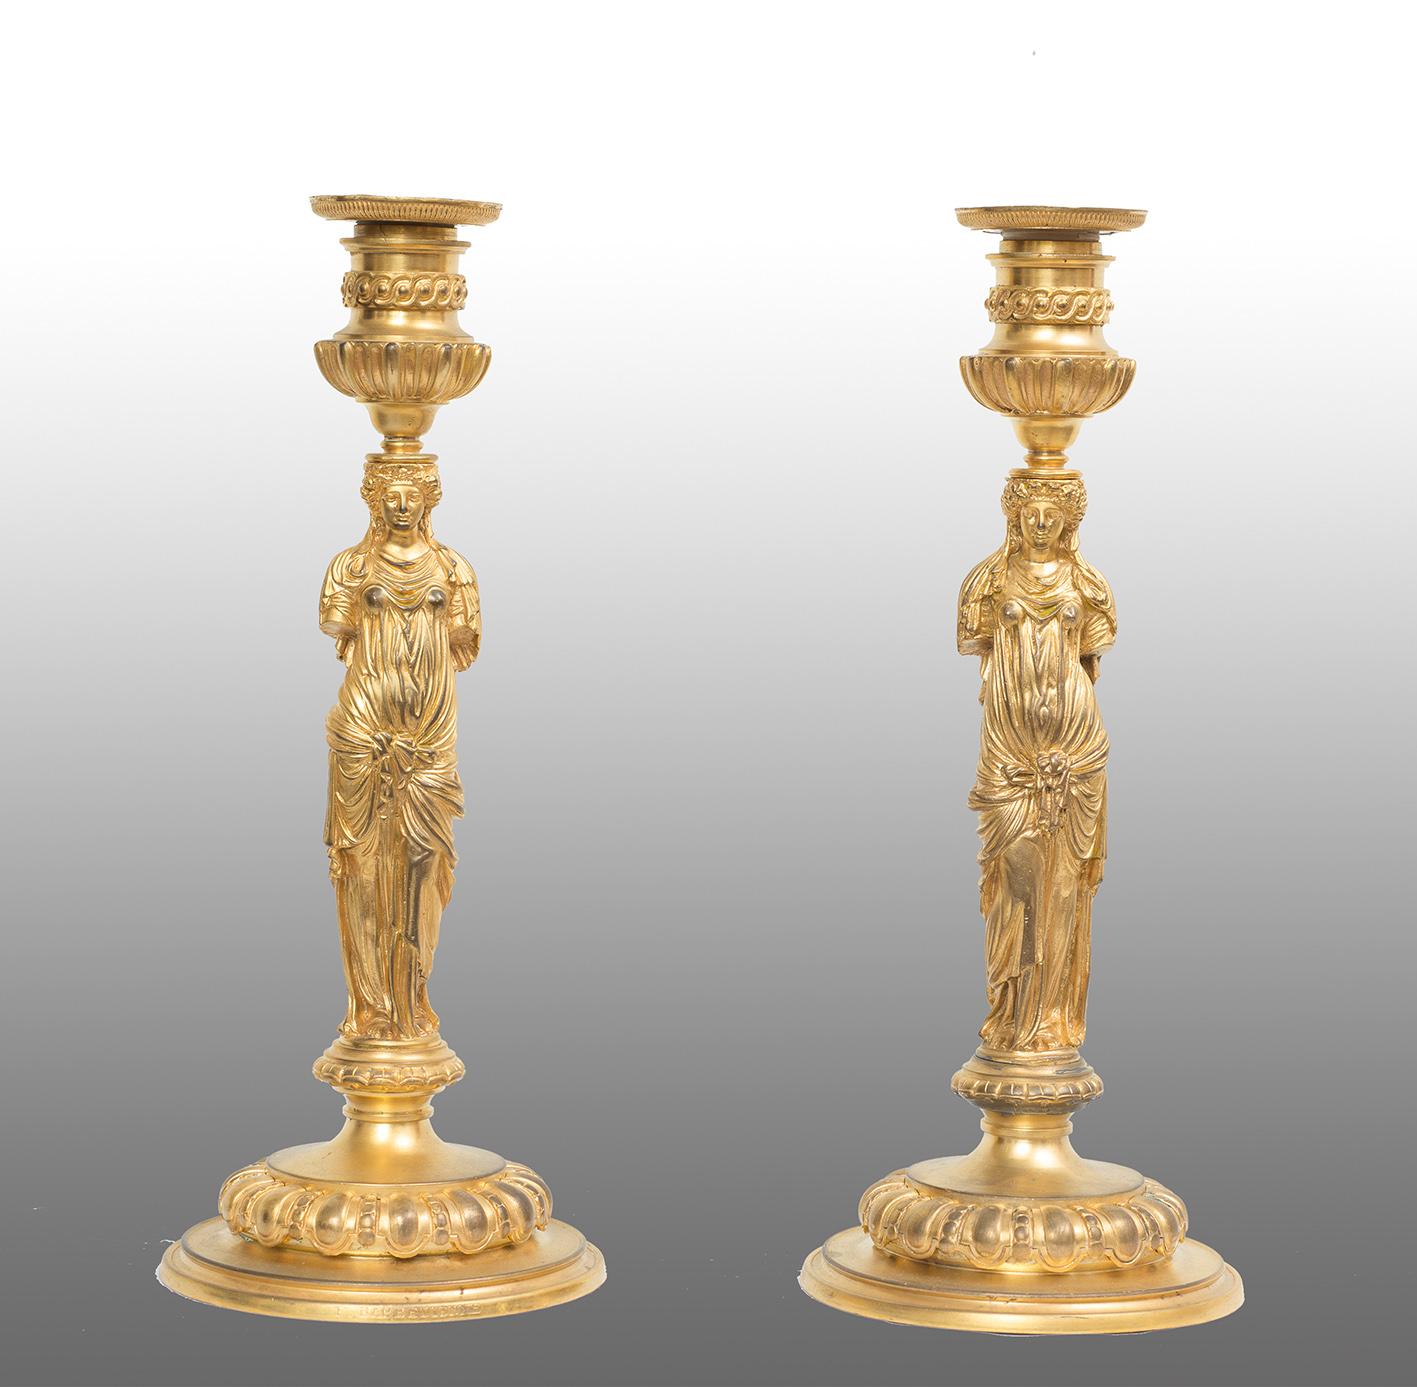 Pair of antique French Empire candelabra signed "Barbedienne."